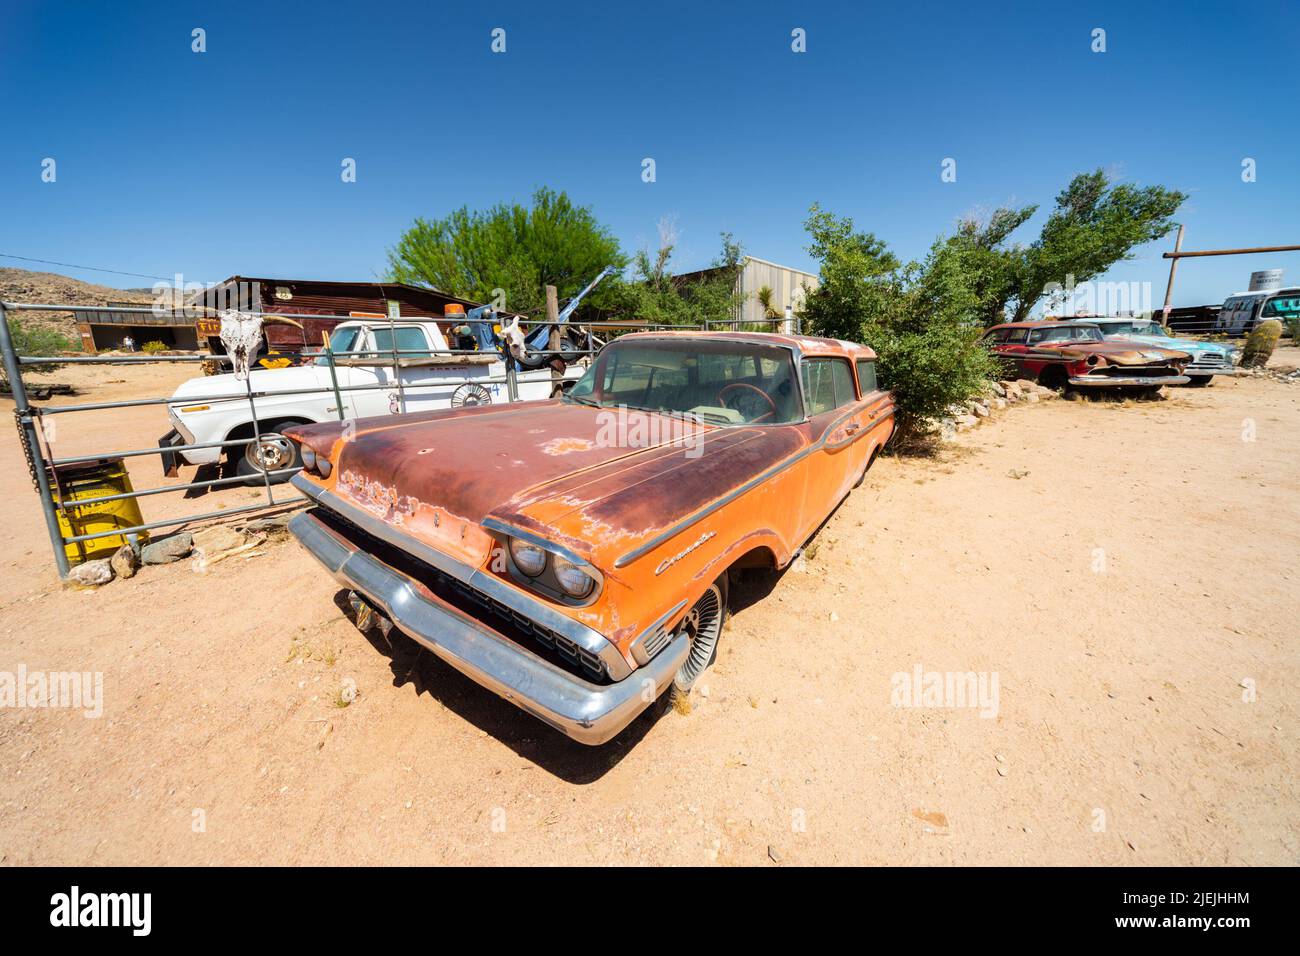 Classic Mercury Commuter car with faded orange paintwork, Hackberry General Store, Hackberry, AZ, USA. Route 66 Arizona Stock Photo